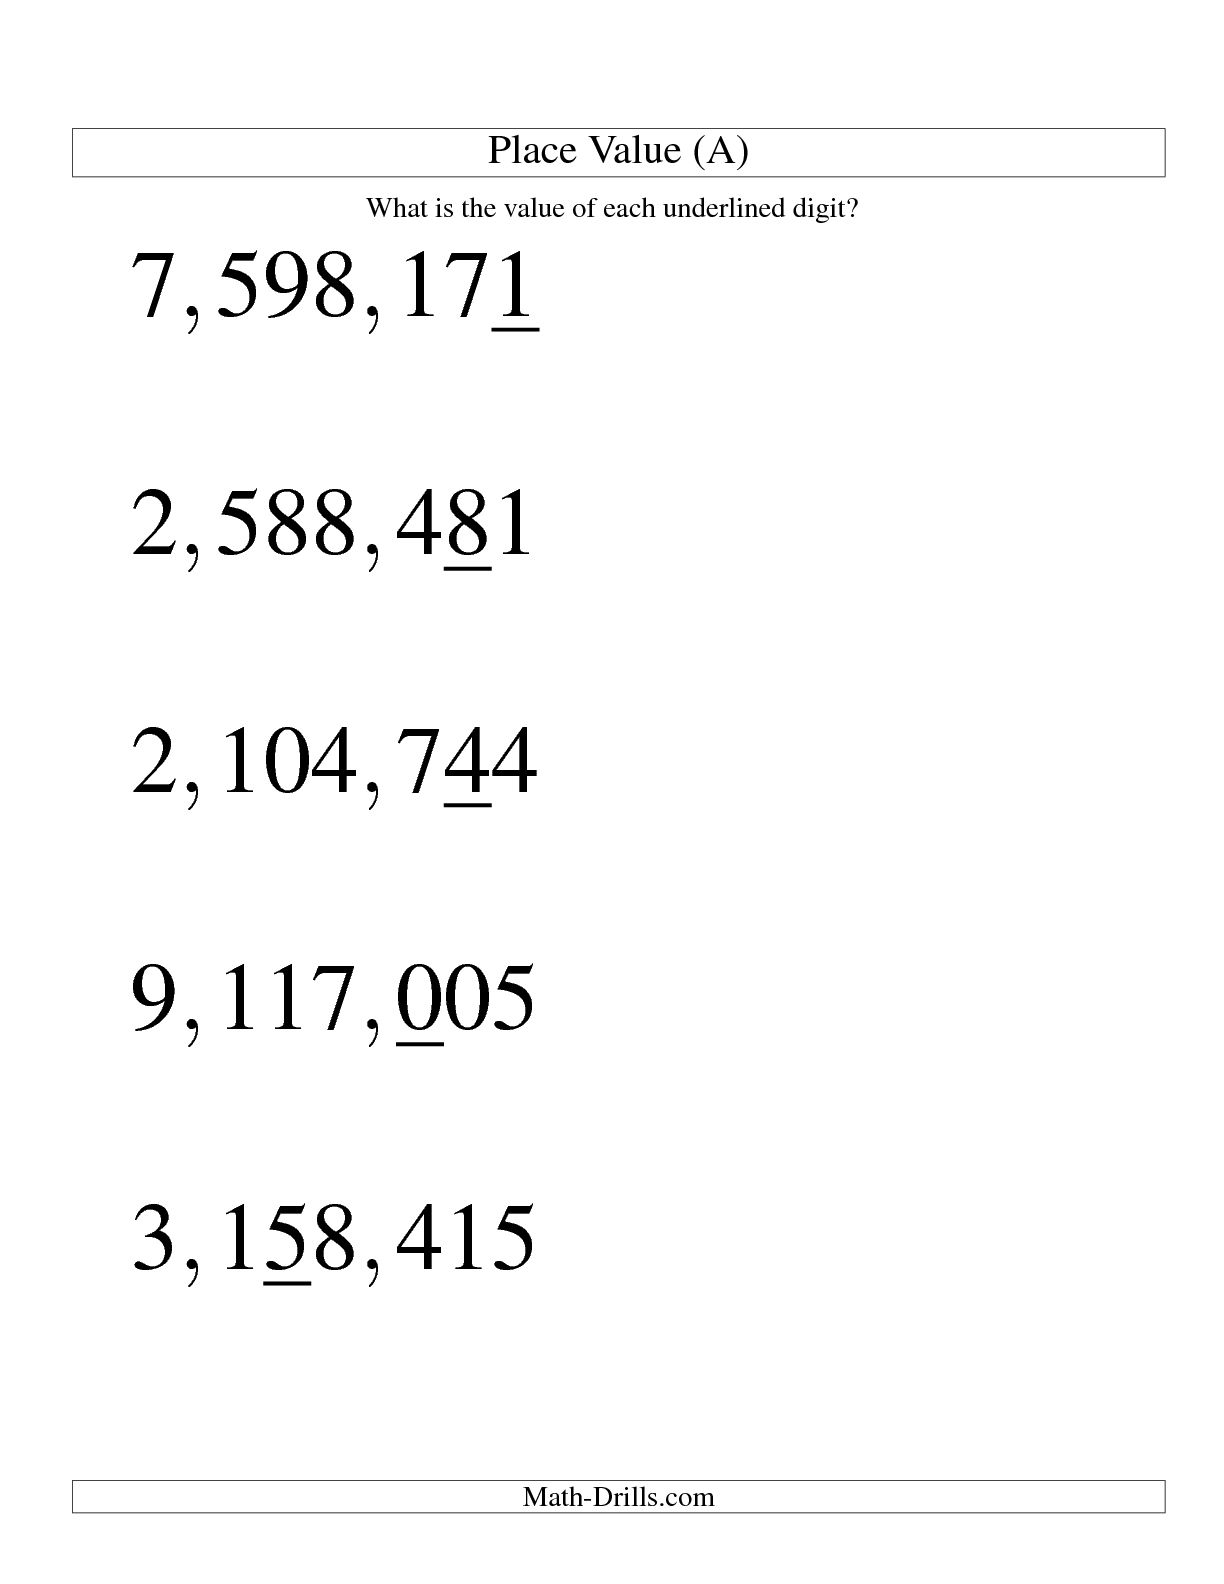 13-best-images-of-place-value-to-millions-worksheet-millions-place